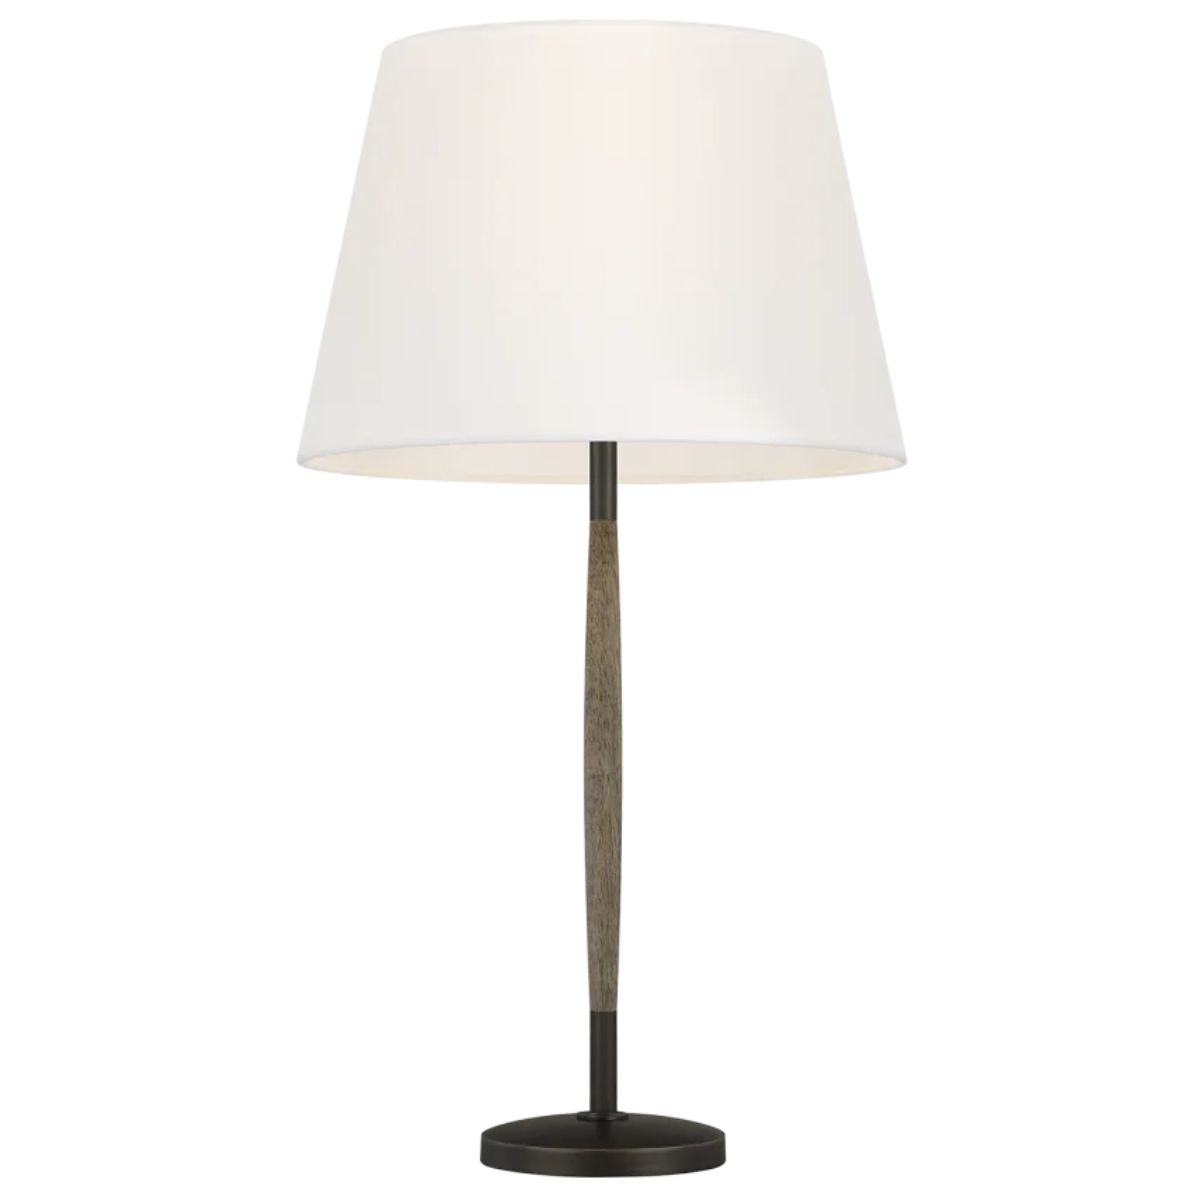 Ferrelli Table Lamp Aged Pewter Metal with Warm Weathered Oak Wood Accents - Bees Lighting